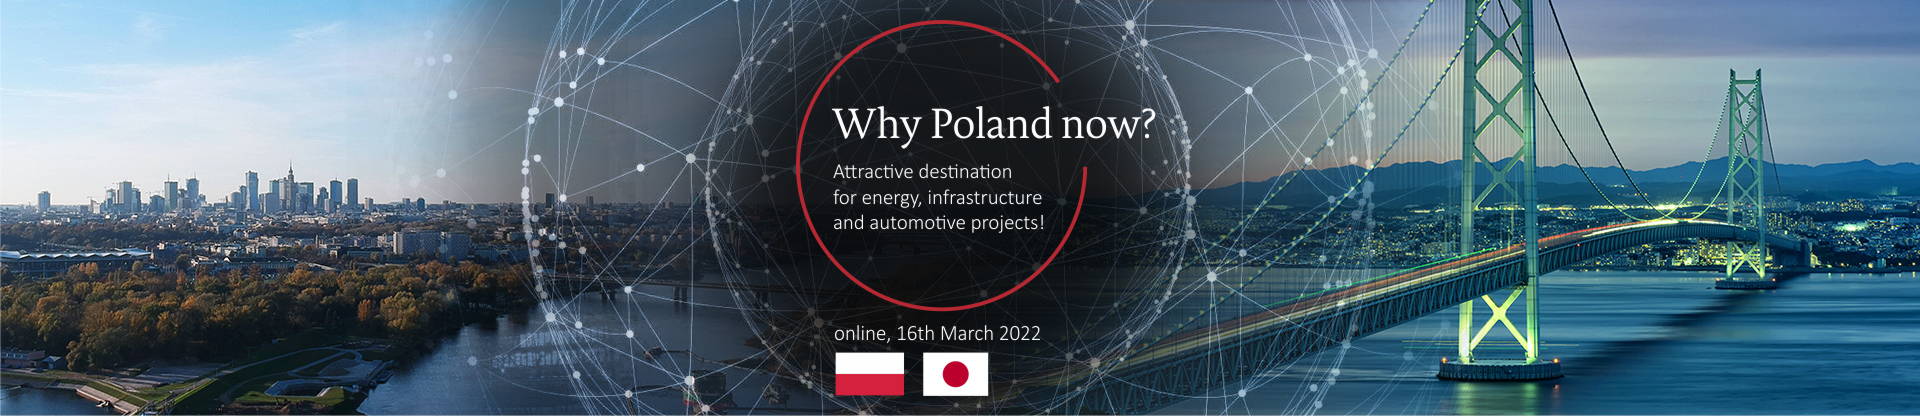 Konferencja inwestycyjna - Why Poland now? Attractive destination for energy, infrastructure and automotive projects!